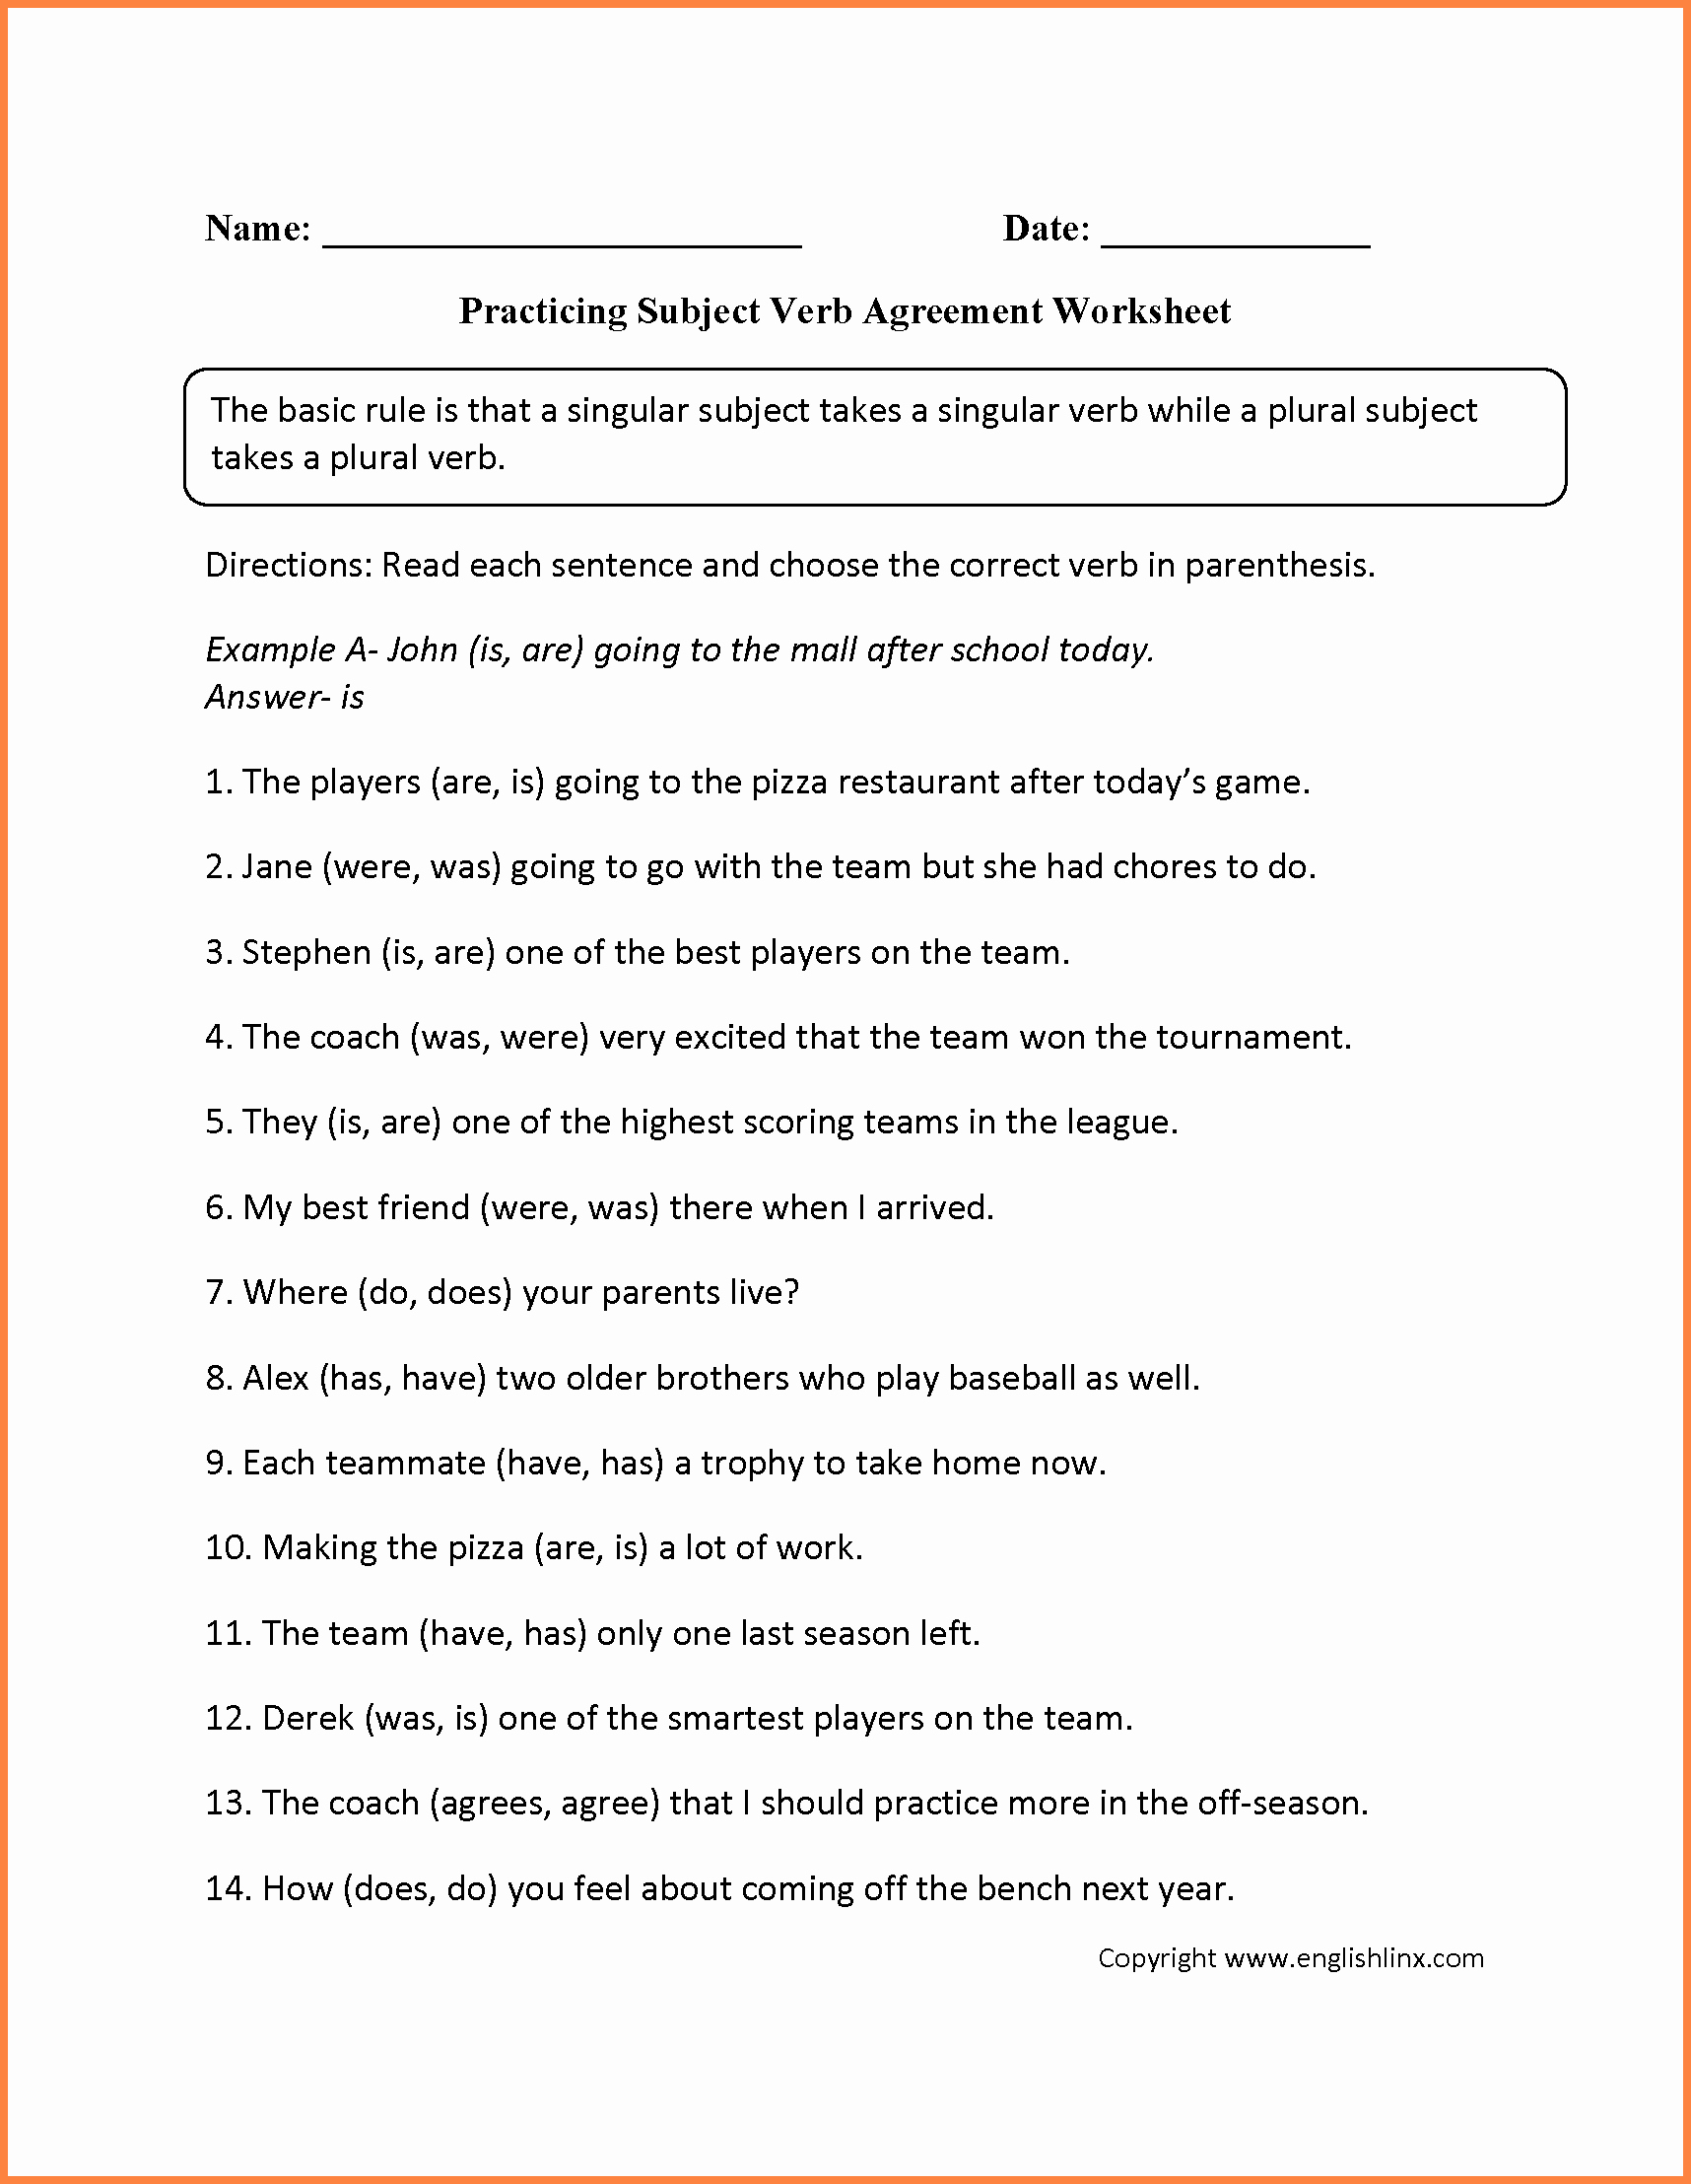 Subject Verb Agreement Worksheet Awesome 8 Pound Subject Verb Agreement Worksheet